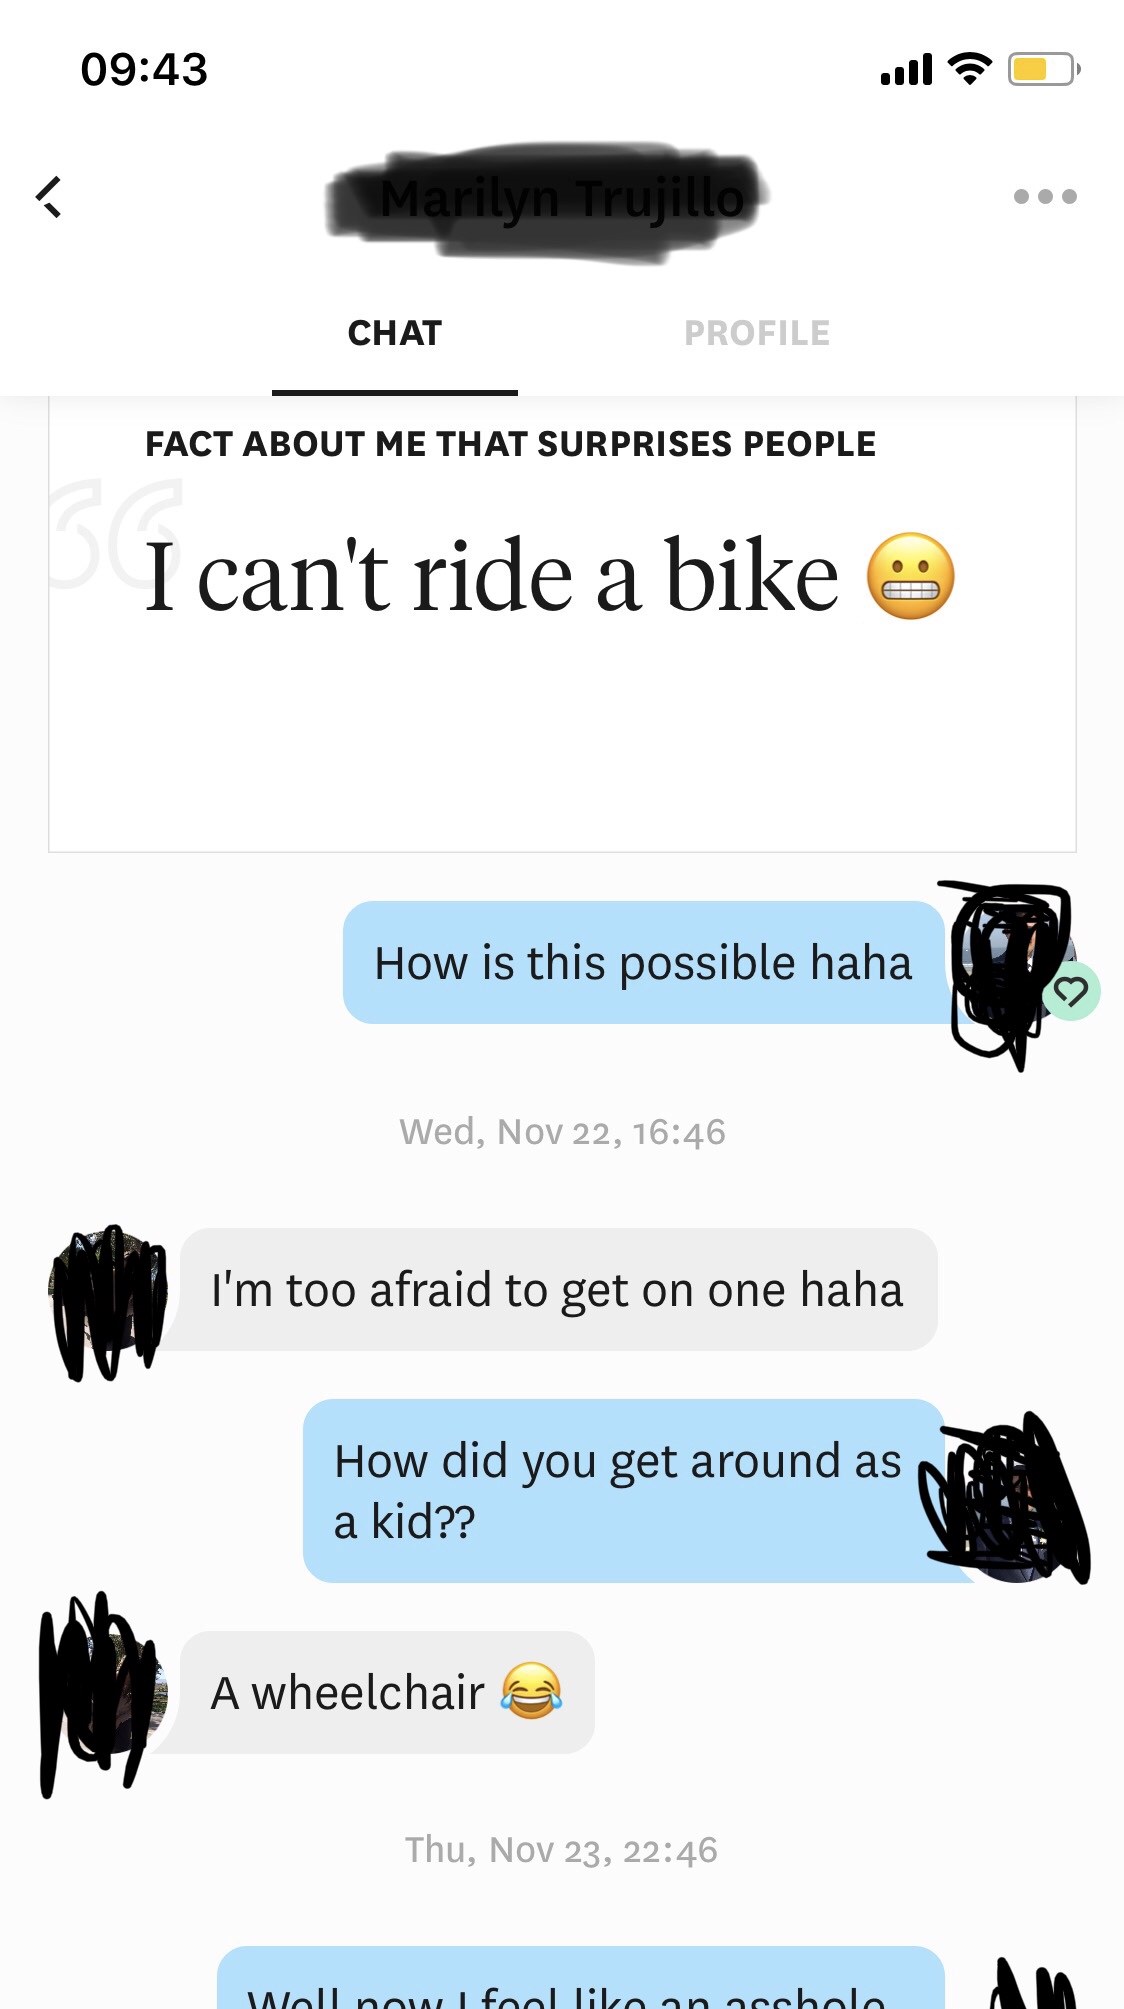 screenshot - Maril 2 Trujillo Chat Profile Fact About Me That Surprises People I can't ride a bike How is this possible haha Wed, Nov 22, I'm too afraid to get on one haha How did you get around as me a kid?? A wheelchair Thu, Nov 23, Wollowfoollikon cebo